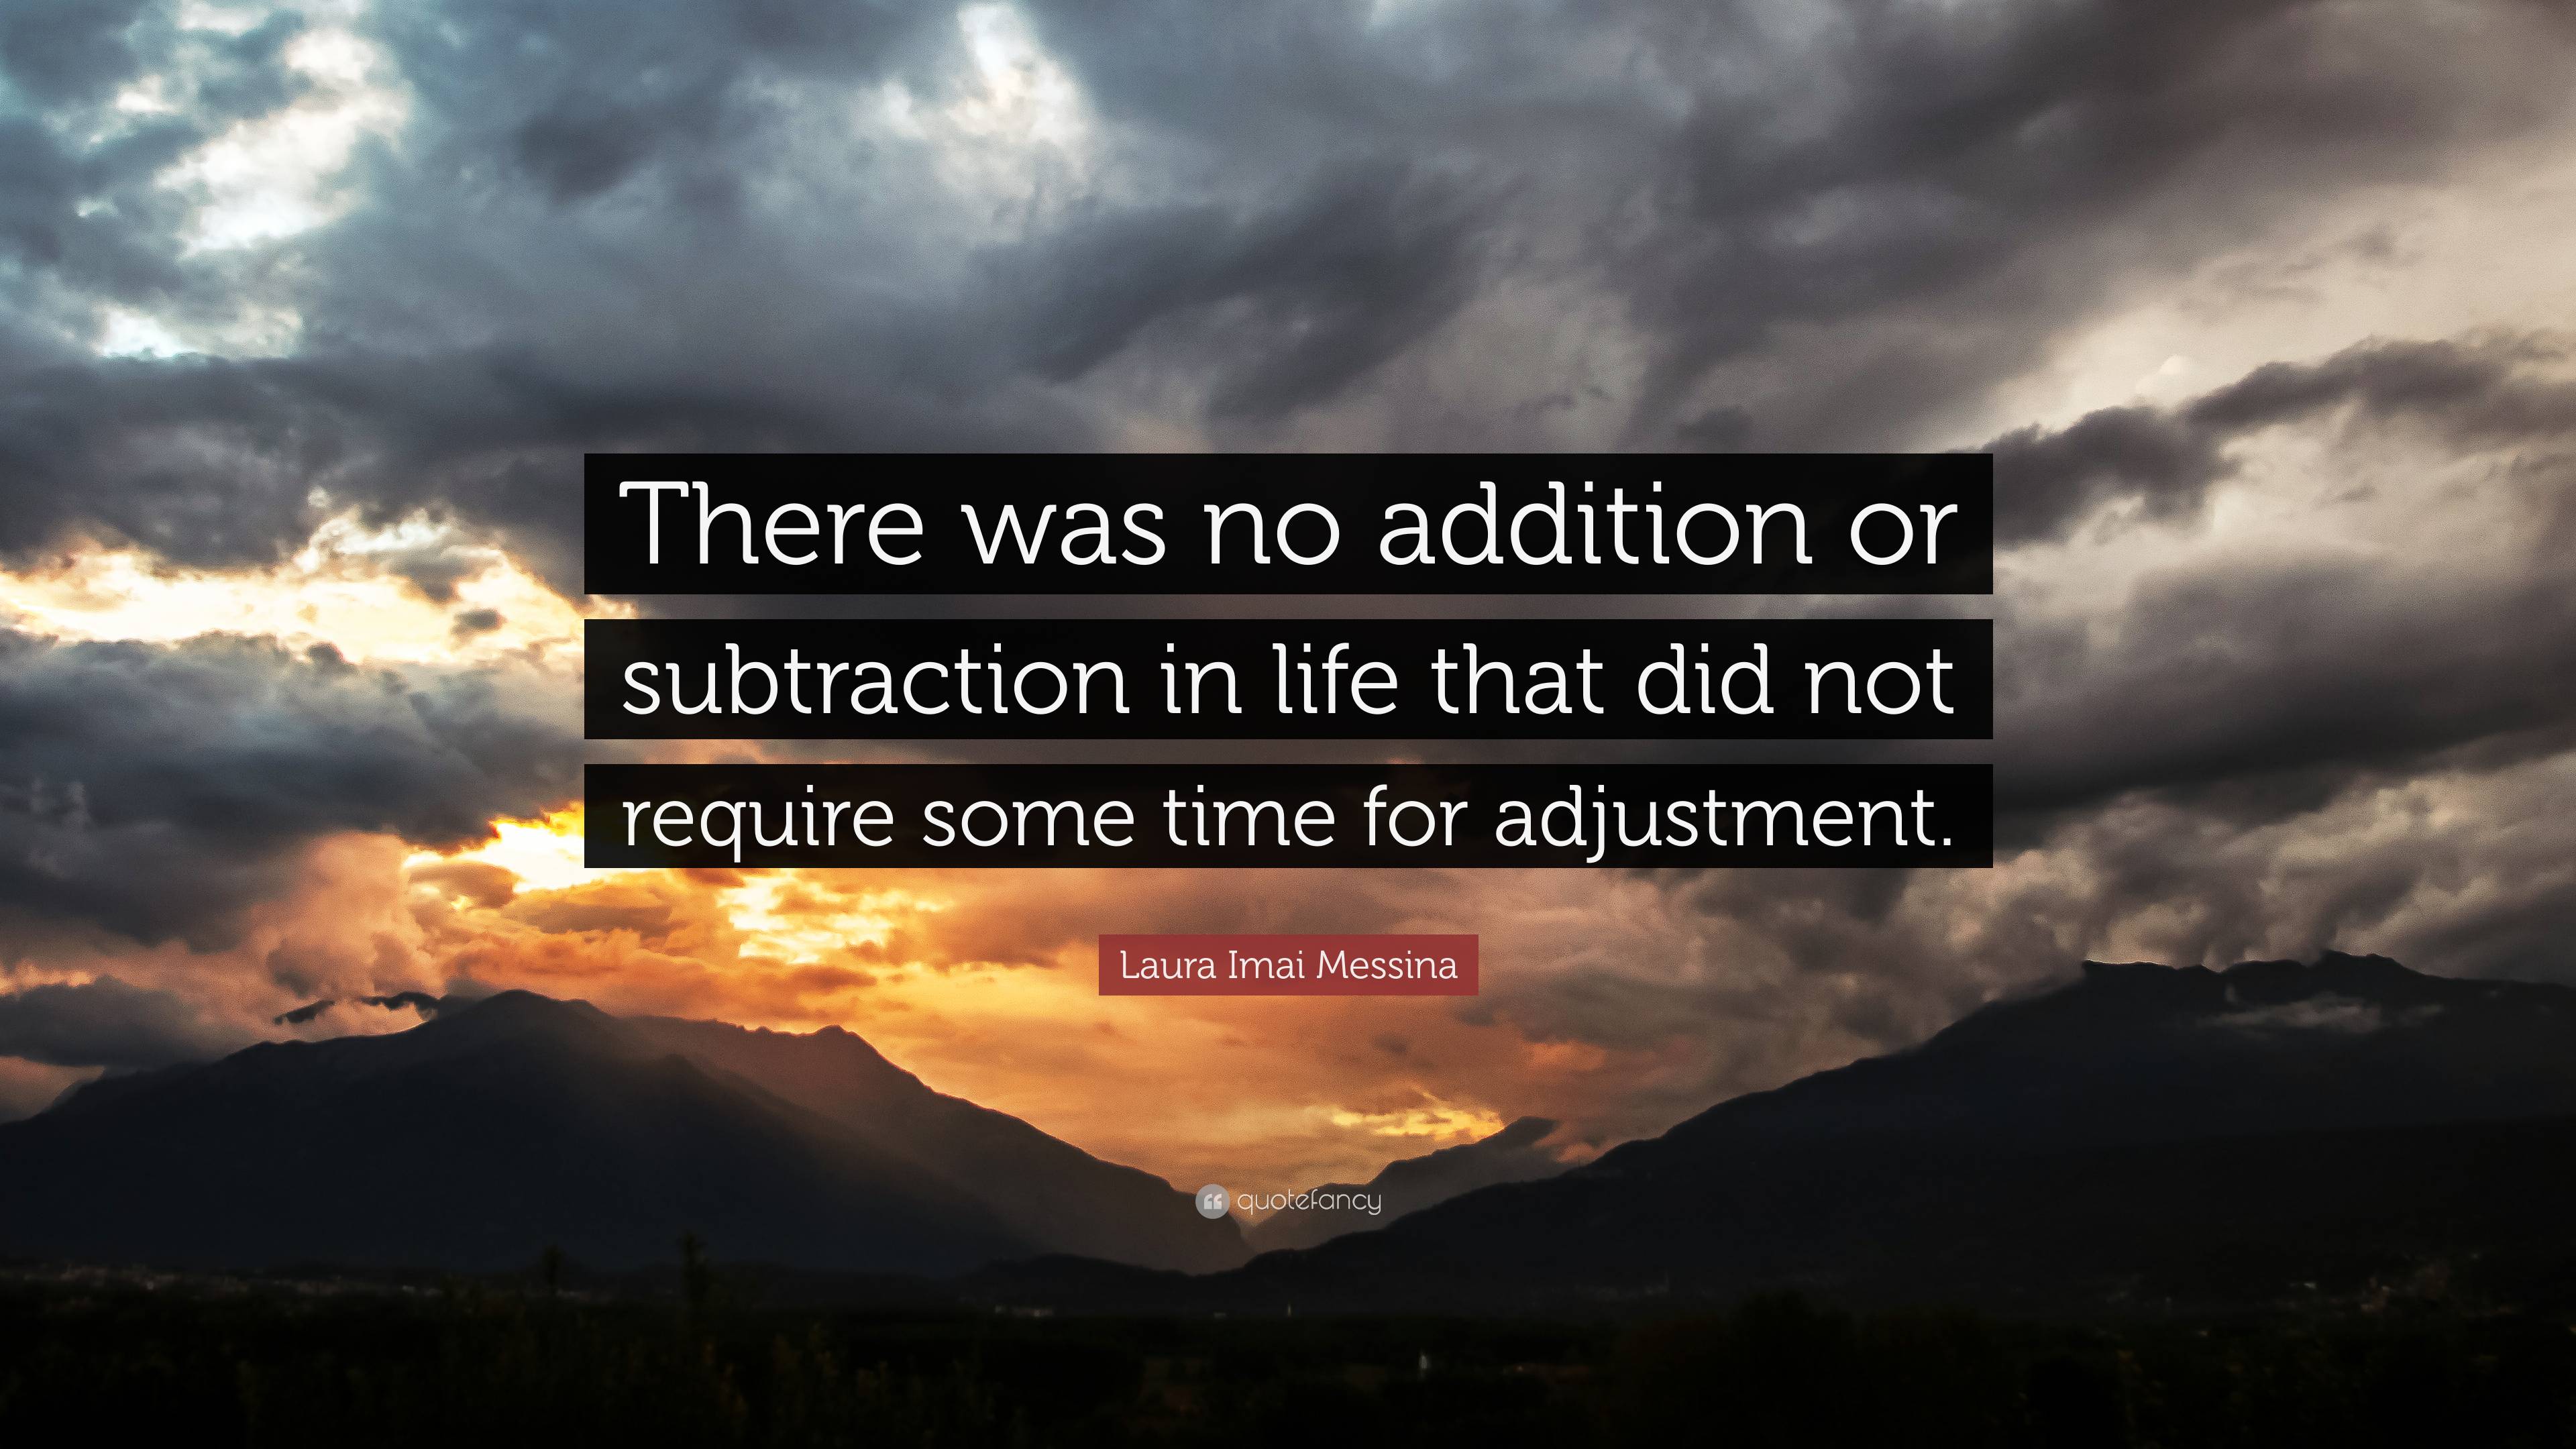 Laura Imai Messina Quote: “There was no addition or subtraction in life  that did not require